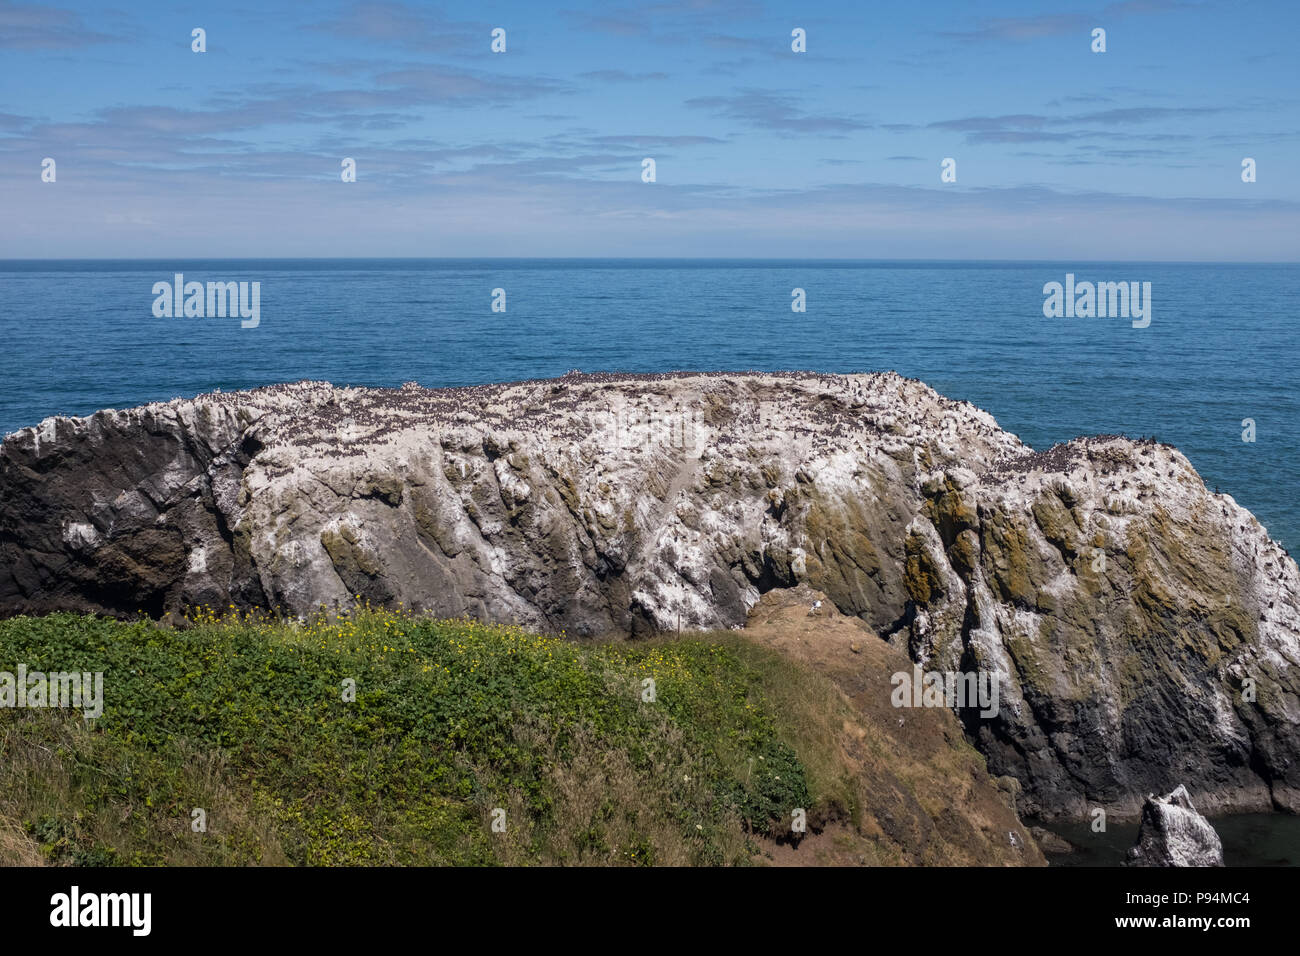 Guano covered rock on the Oregon Coastline with cormorants and other sea birds in residence Stock Photo